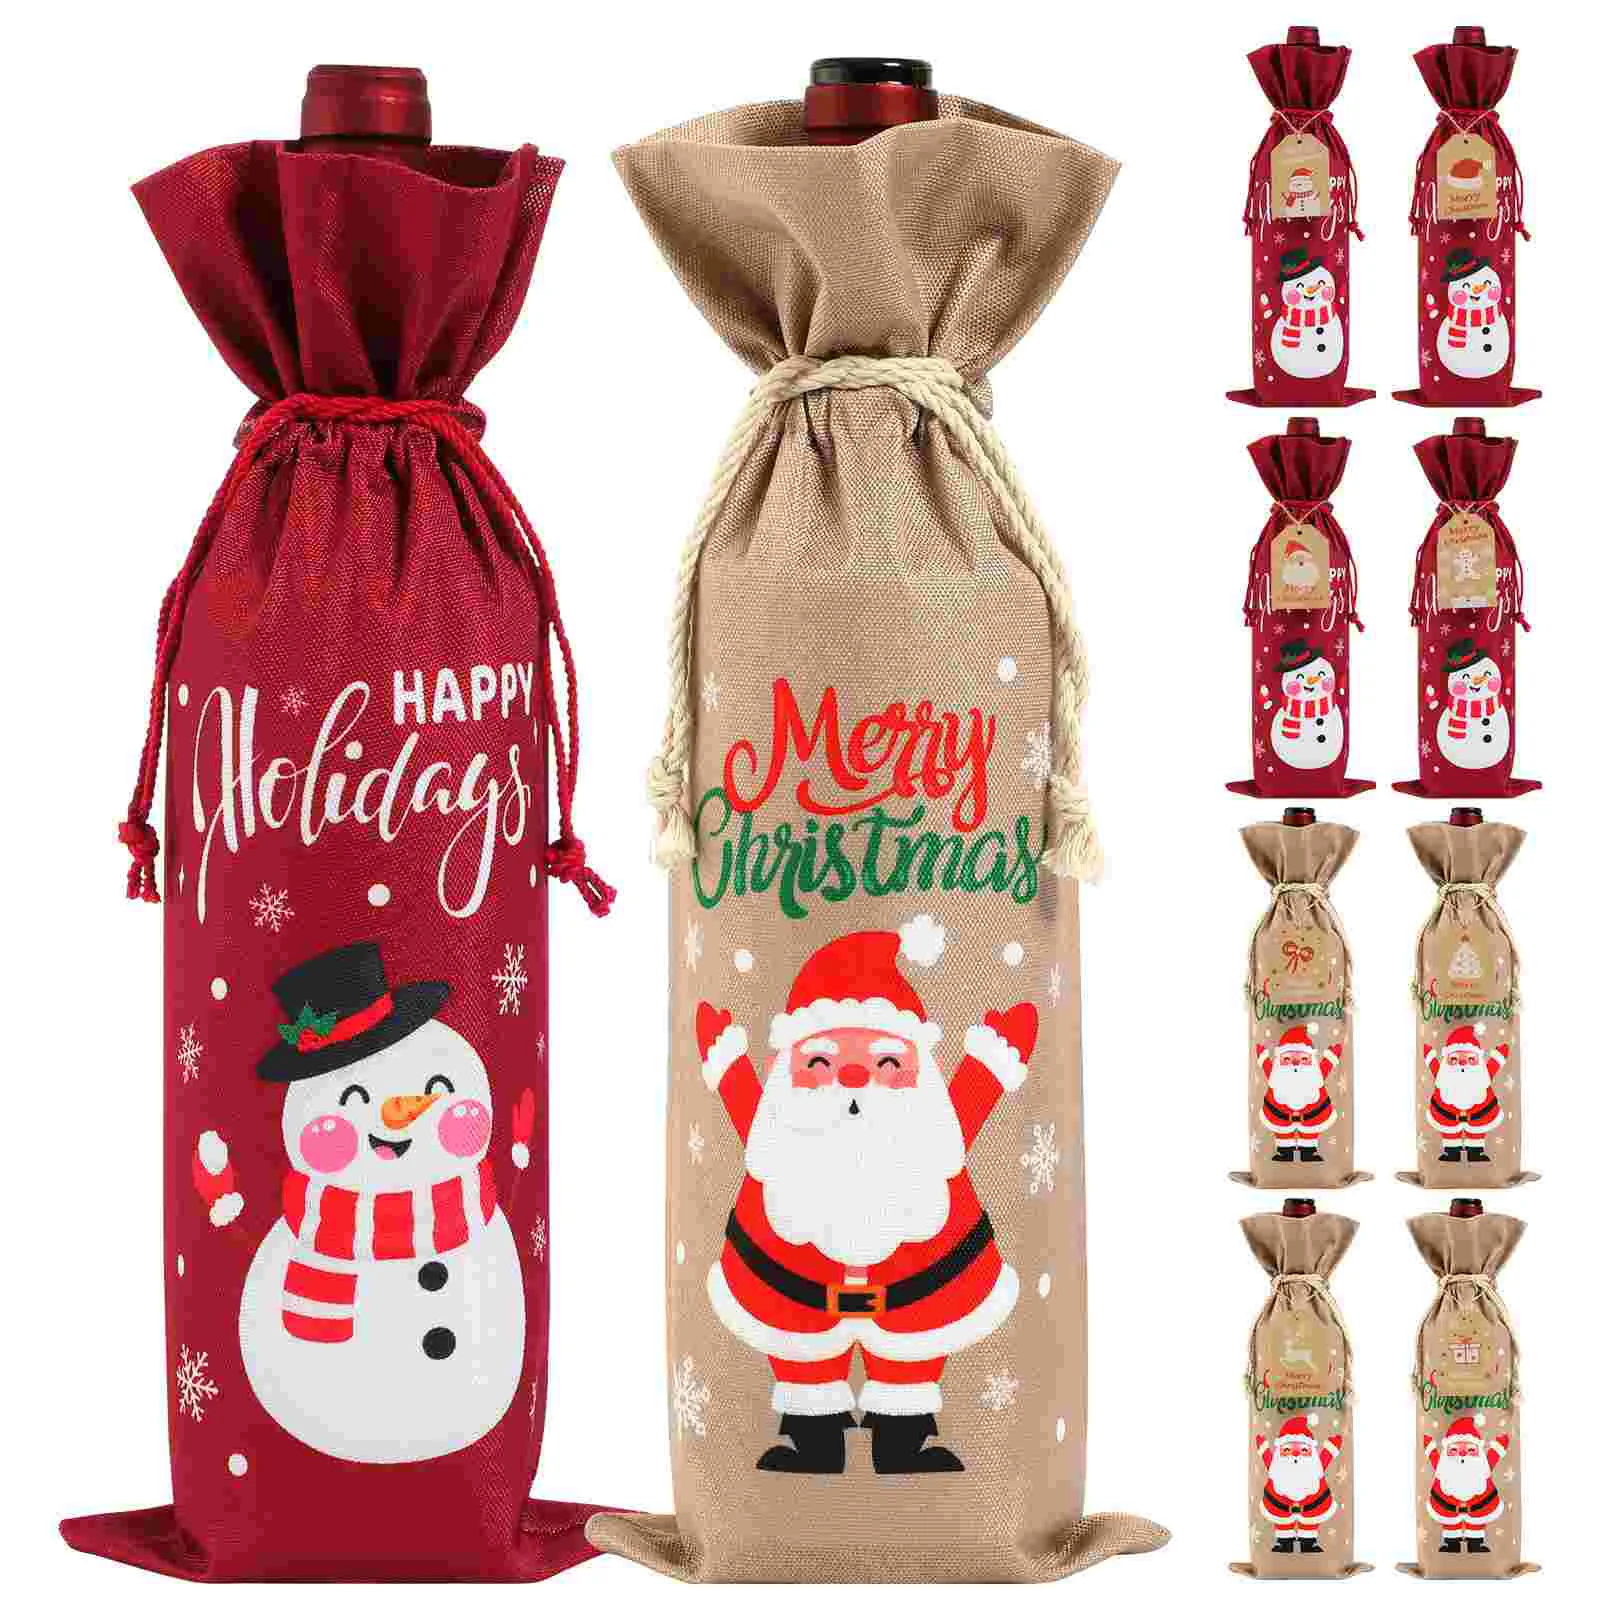 

LUXSHINY Wine Bottle Bags Christmas Wine Gift Bags Burlap Party Favor Wine Bags Drawstring Wine Bags with Tags